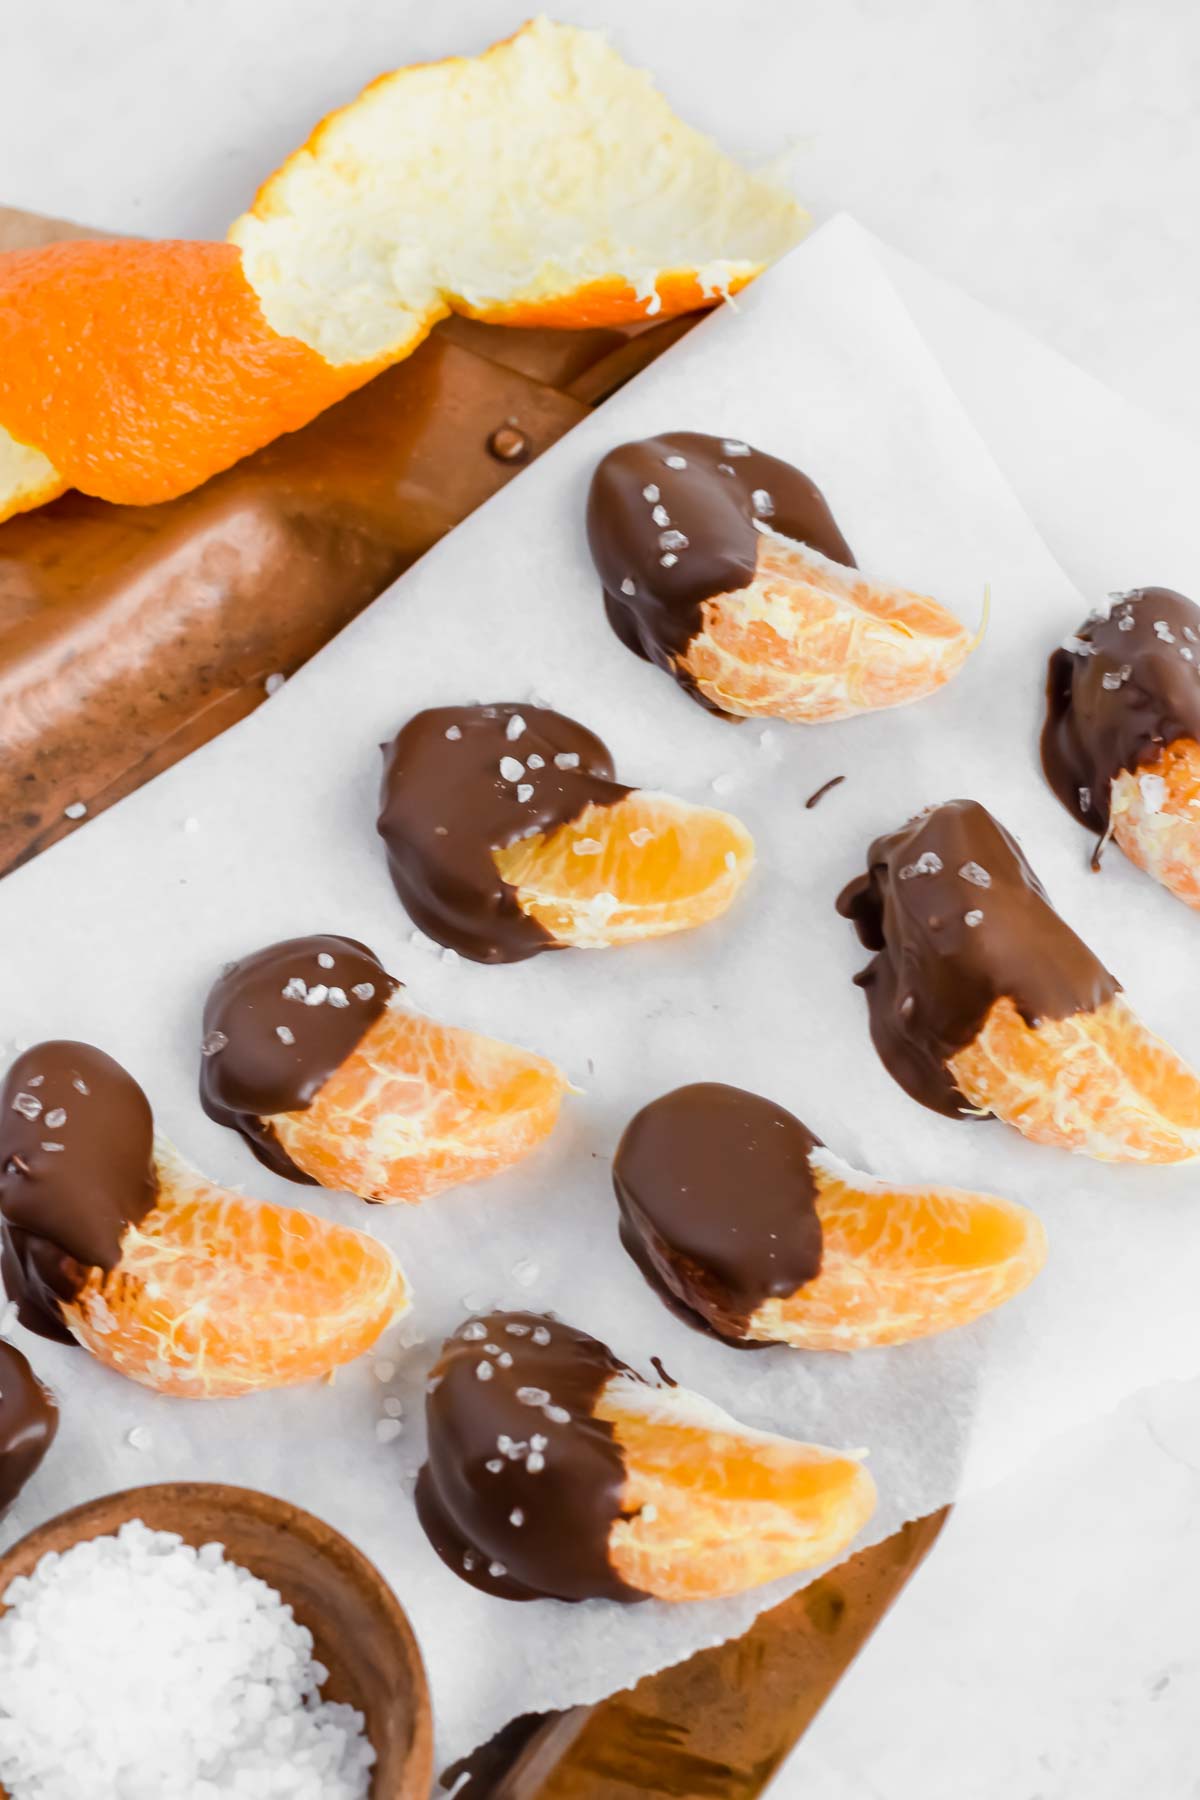 Chocolate covered oranges sprinkled with sea salt on parchment paper.